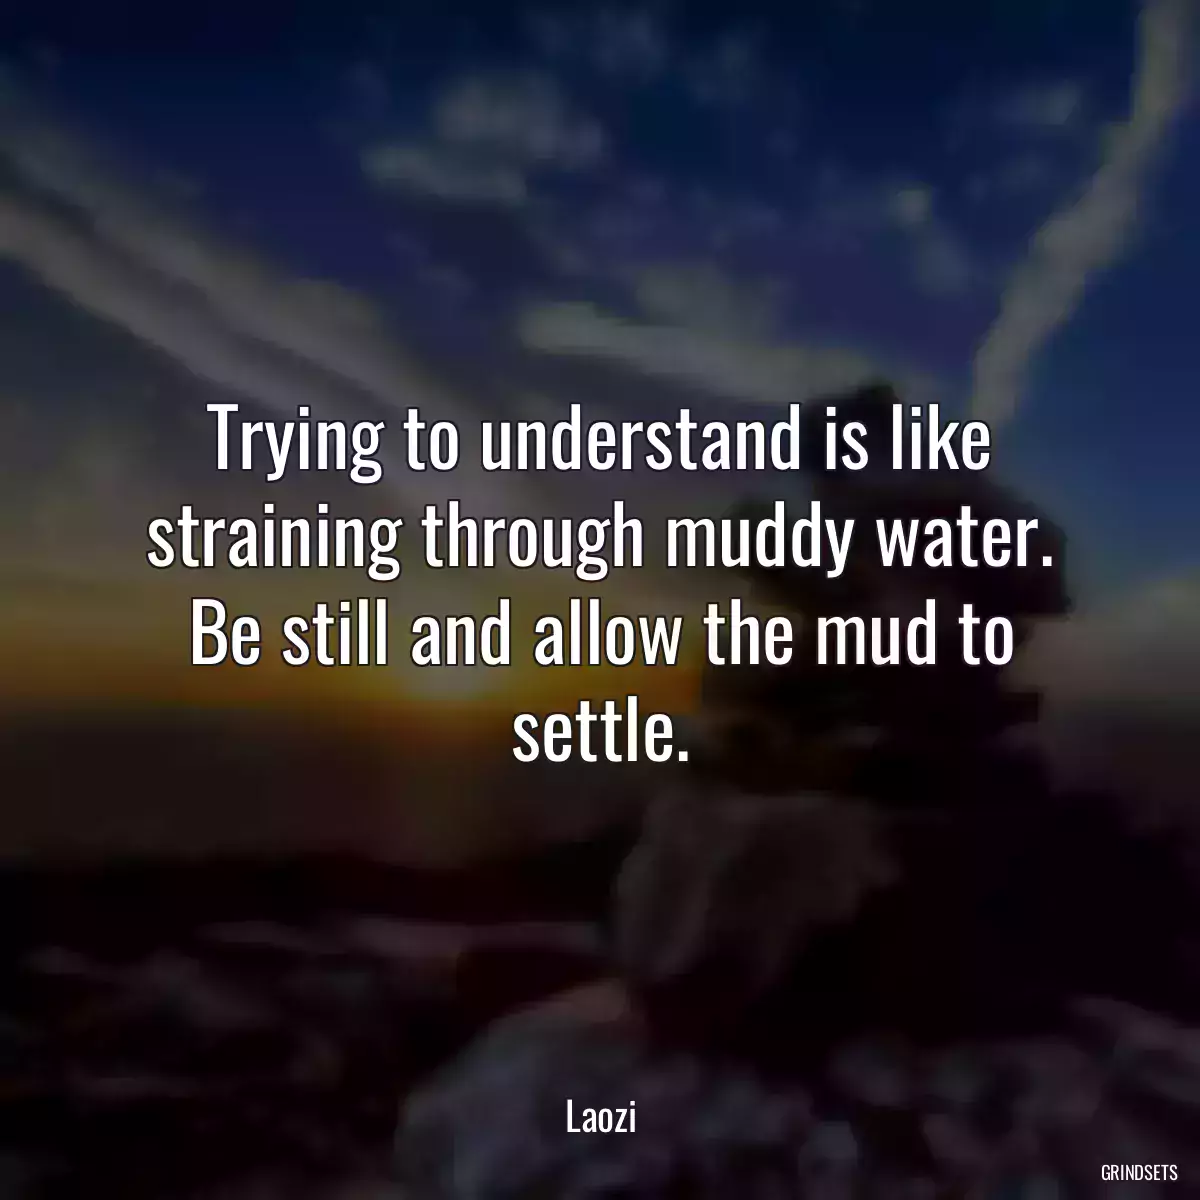 Trying to understand is like straining through muddy water. Be still and allow the mud to settle.